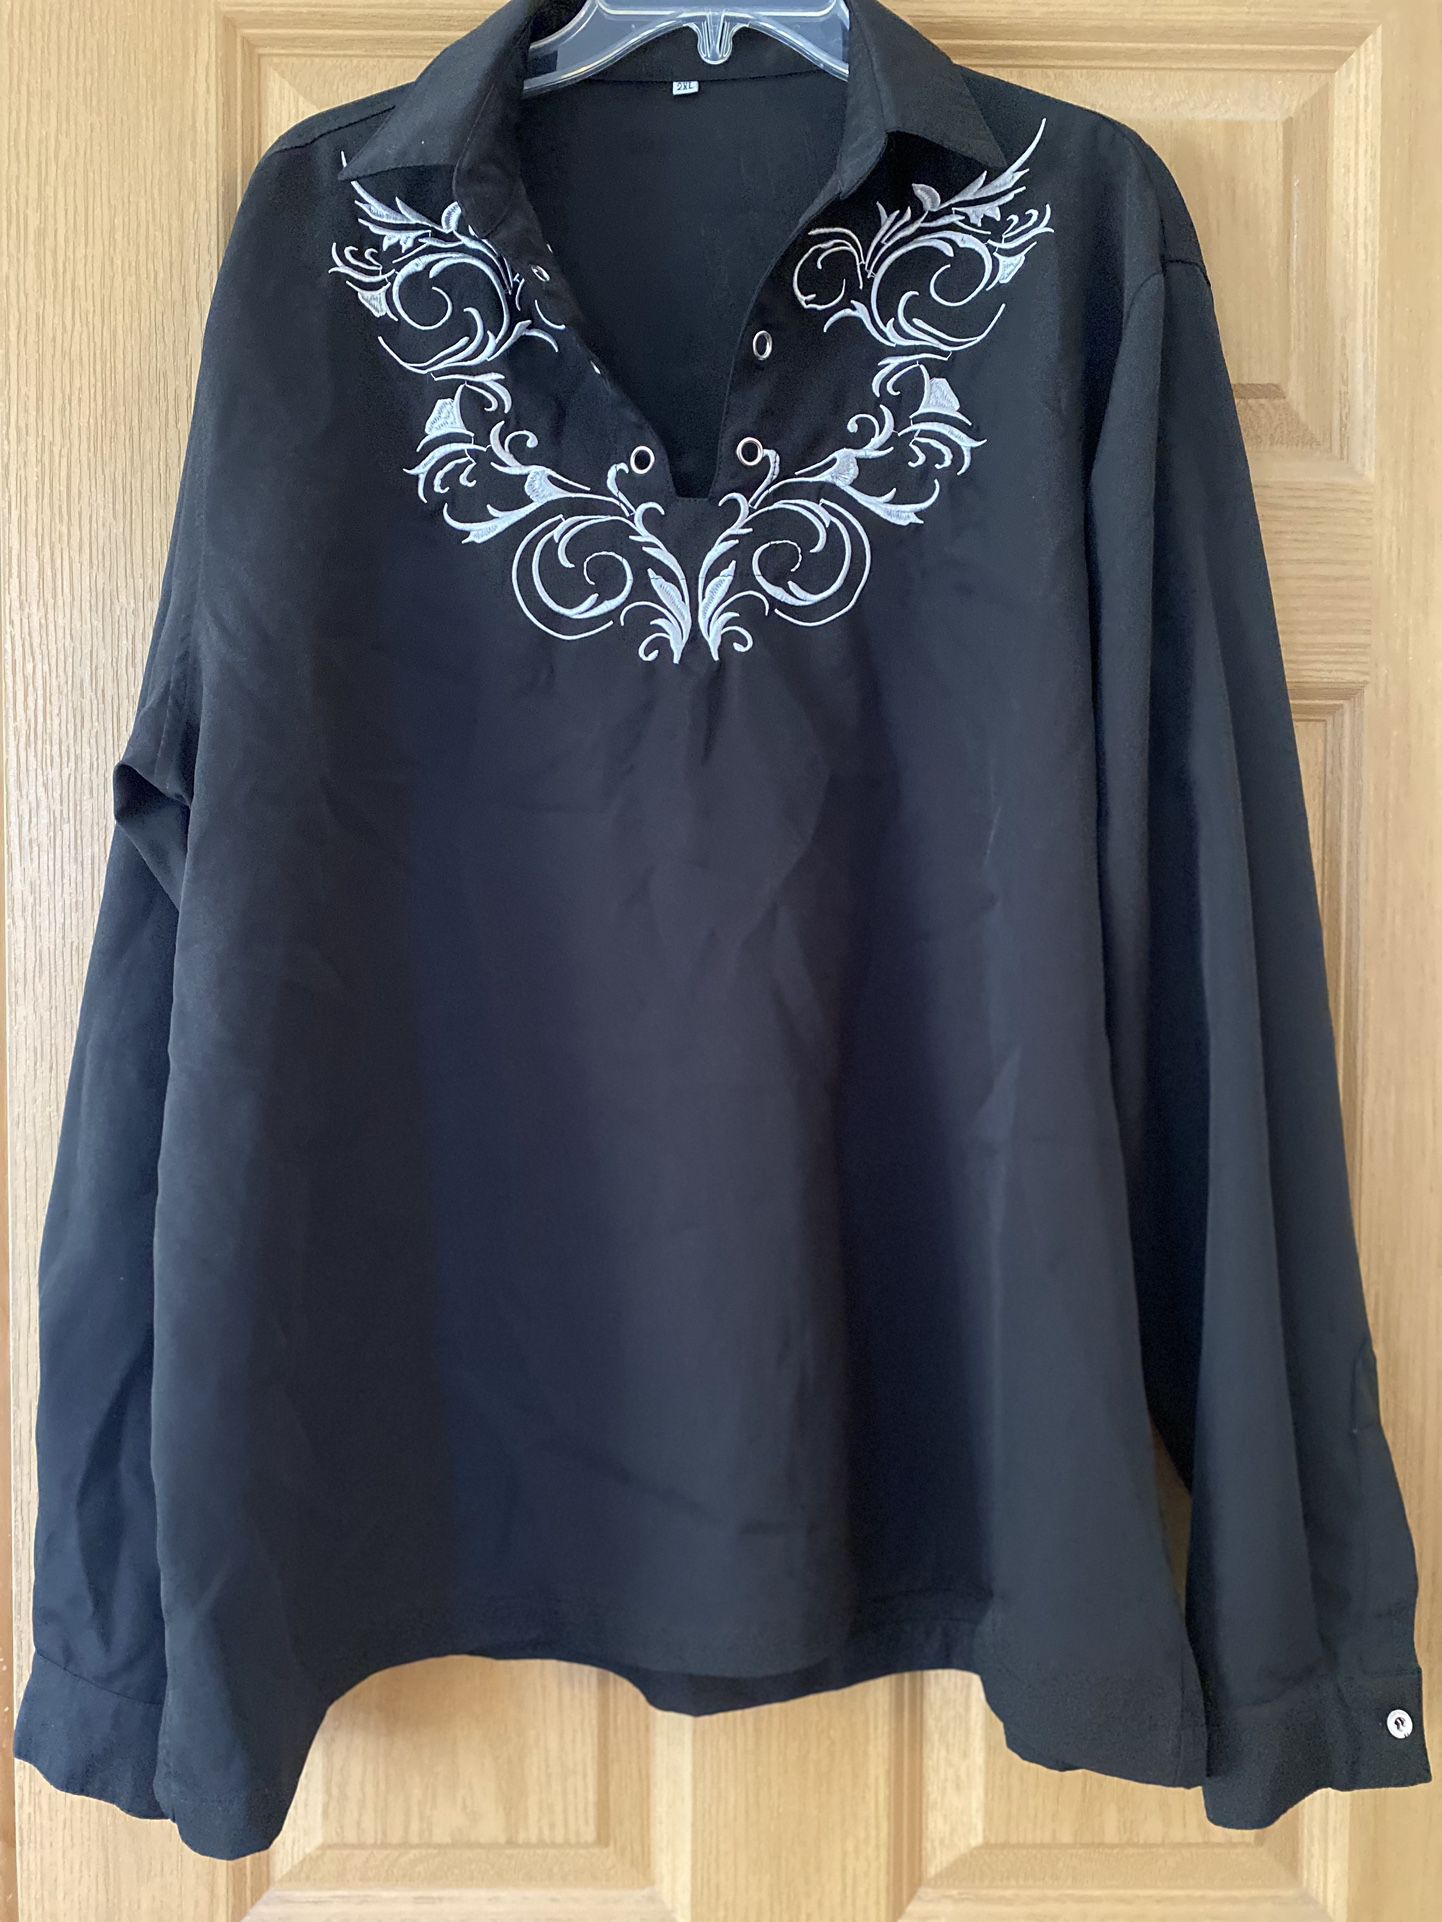 Men’s Size 2XL Black Long Sleeve Embroidered Shirt 